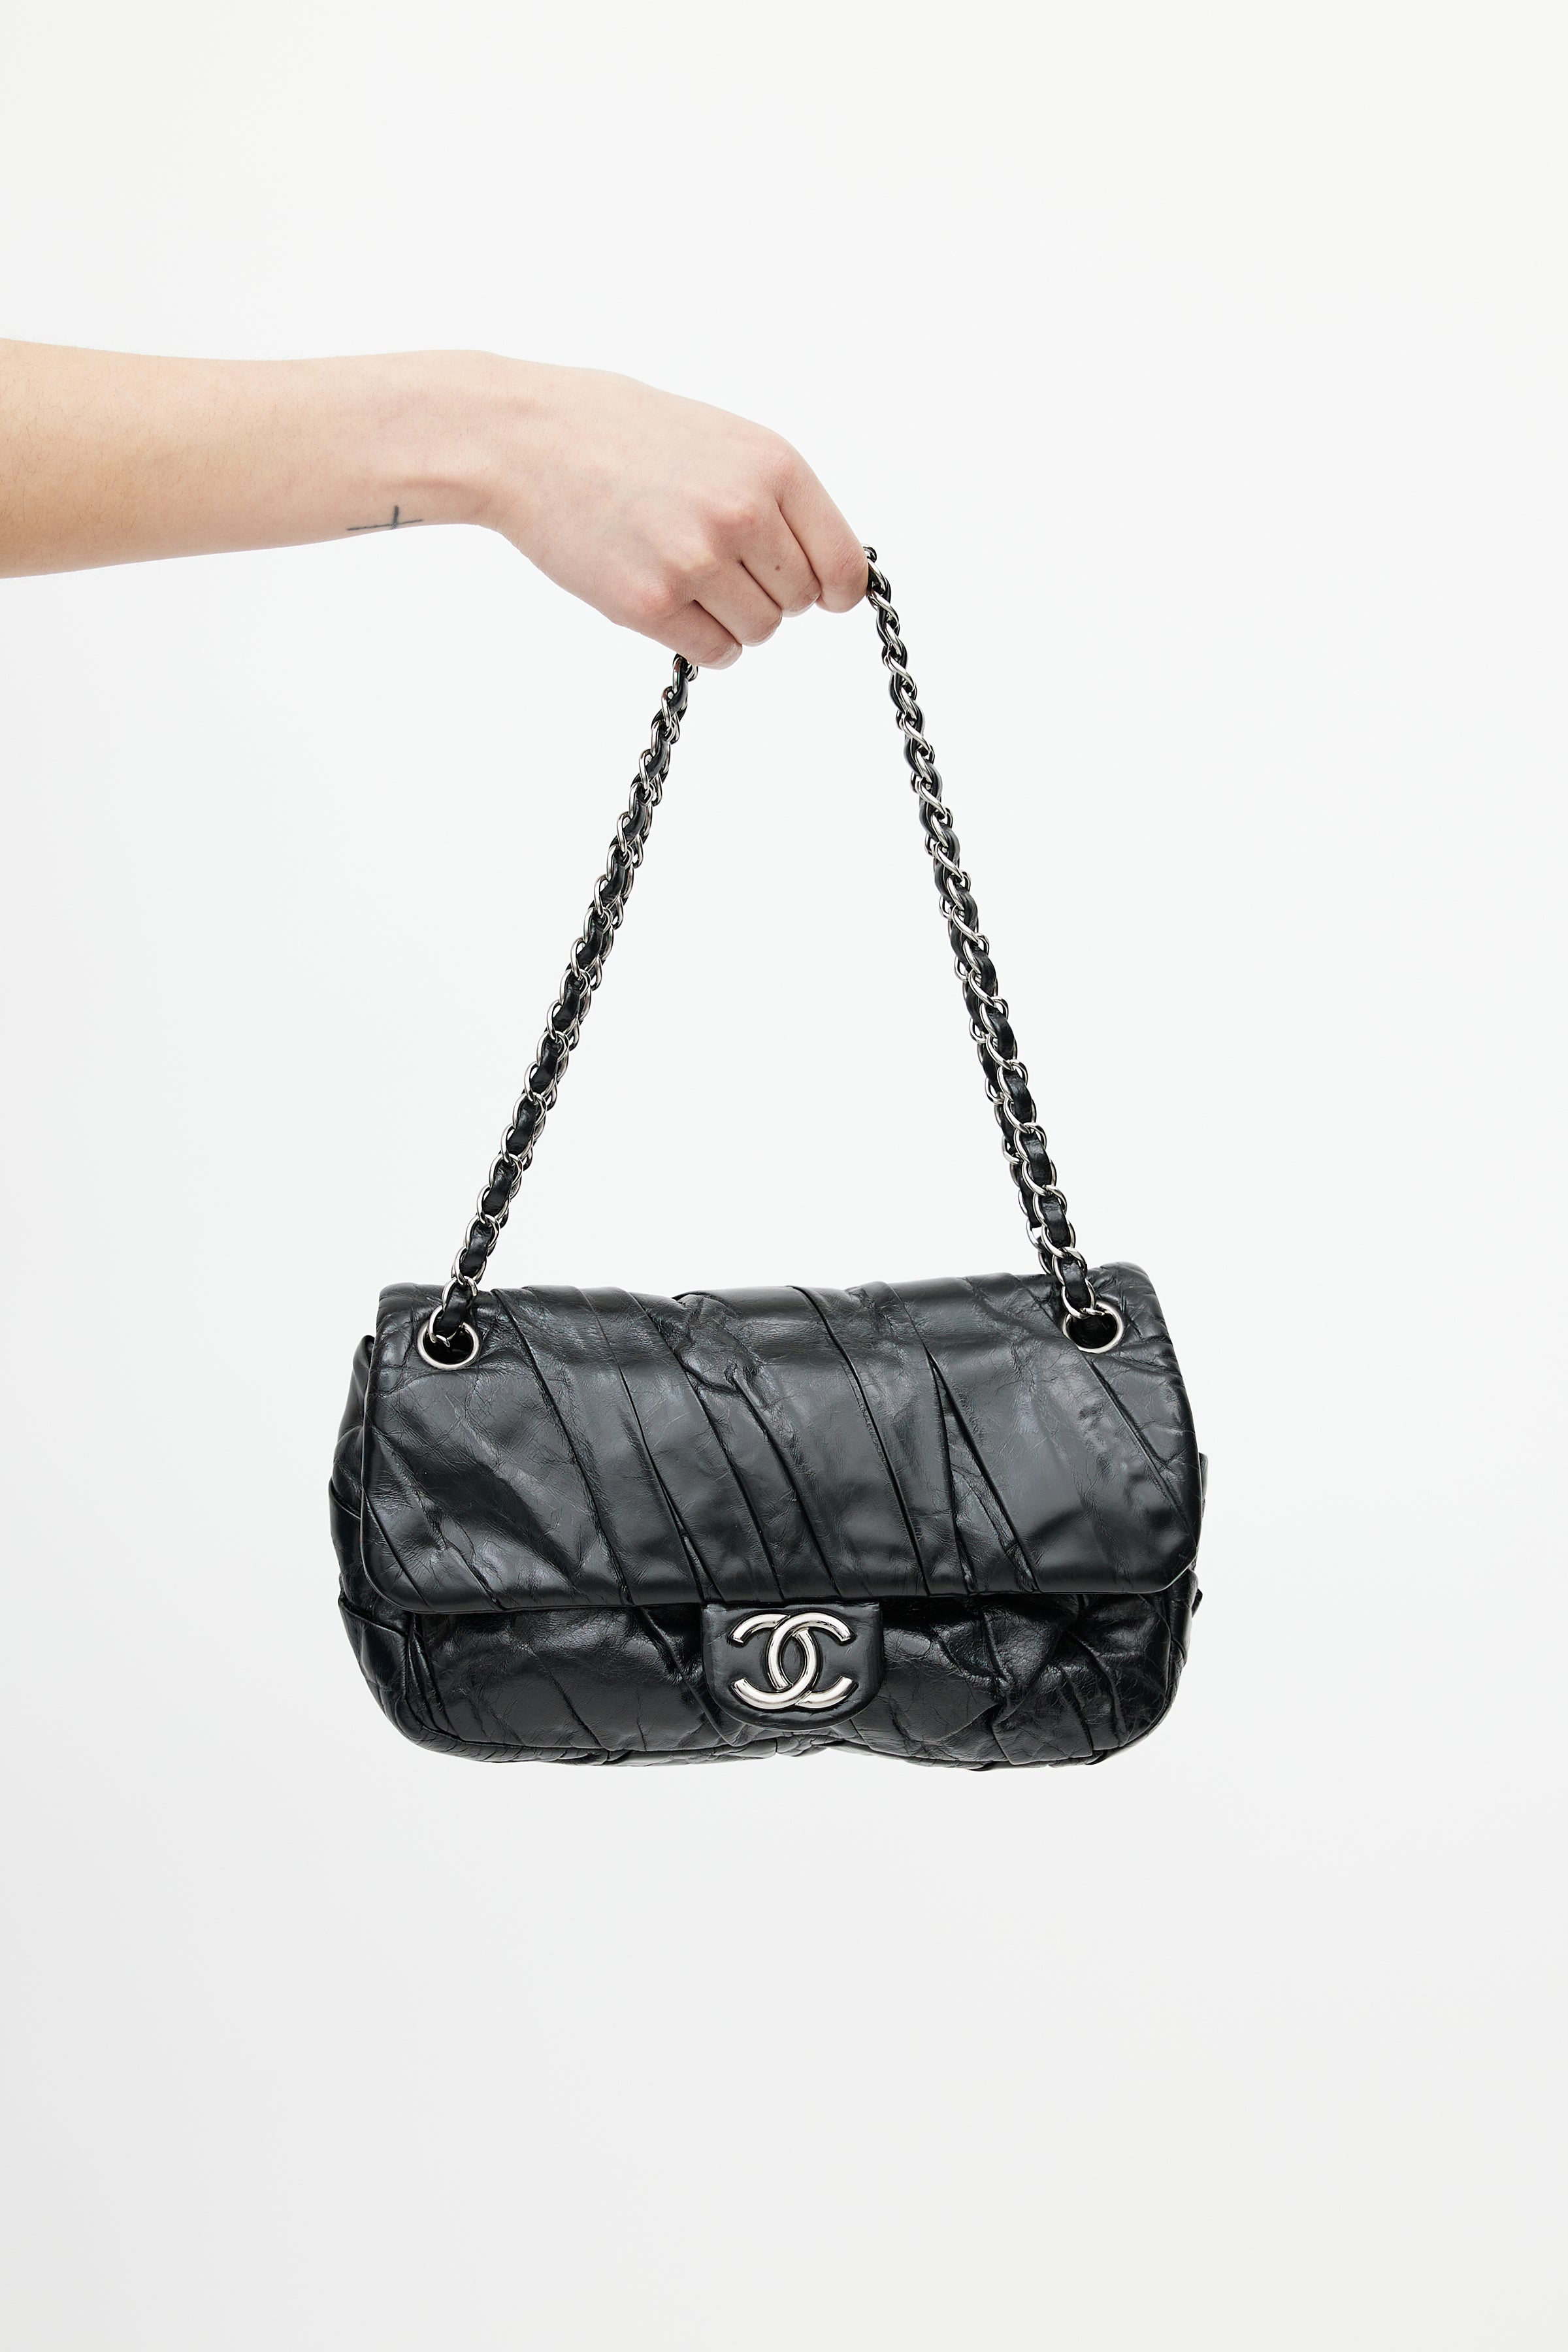 chanel twisted flap bag